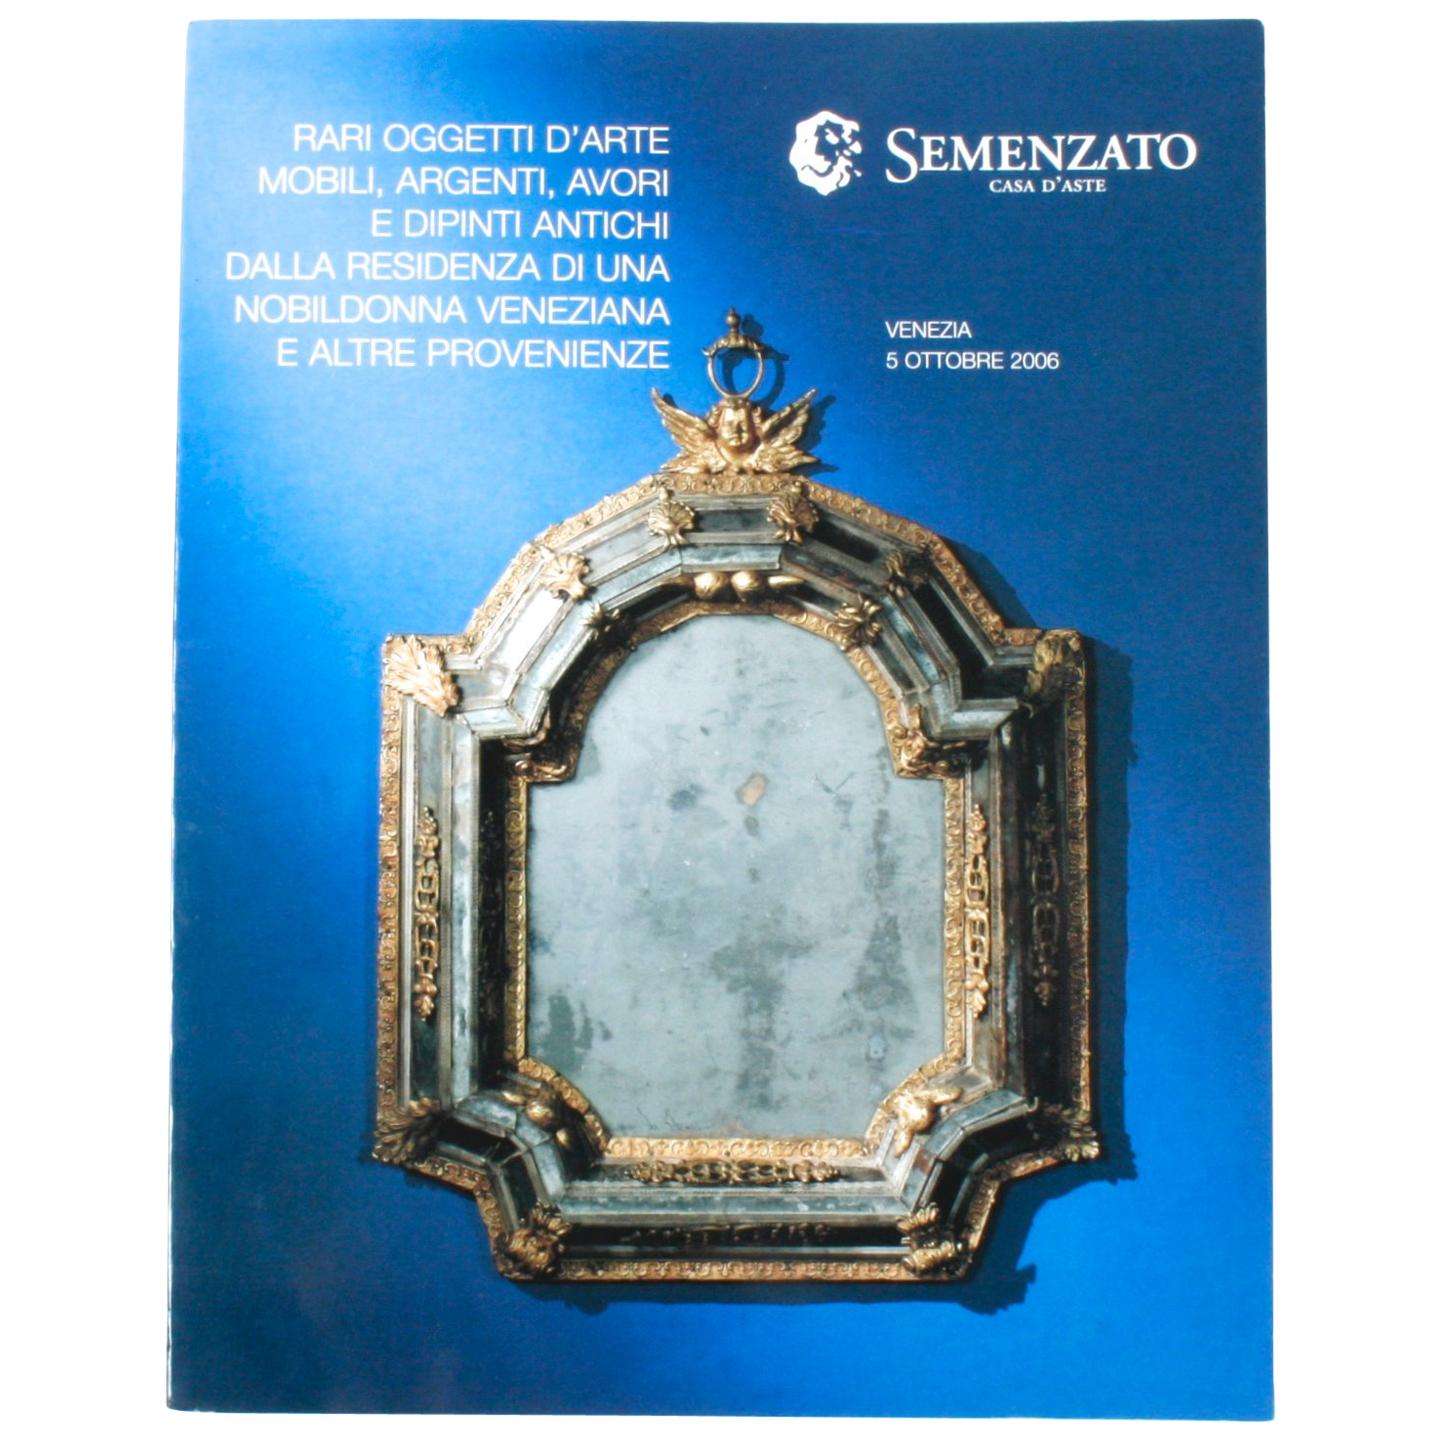 Auction Catalogue of Italian Fine Art, Silver, Ivory, and Venetian Objects, 2006